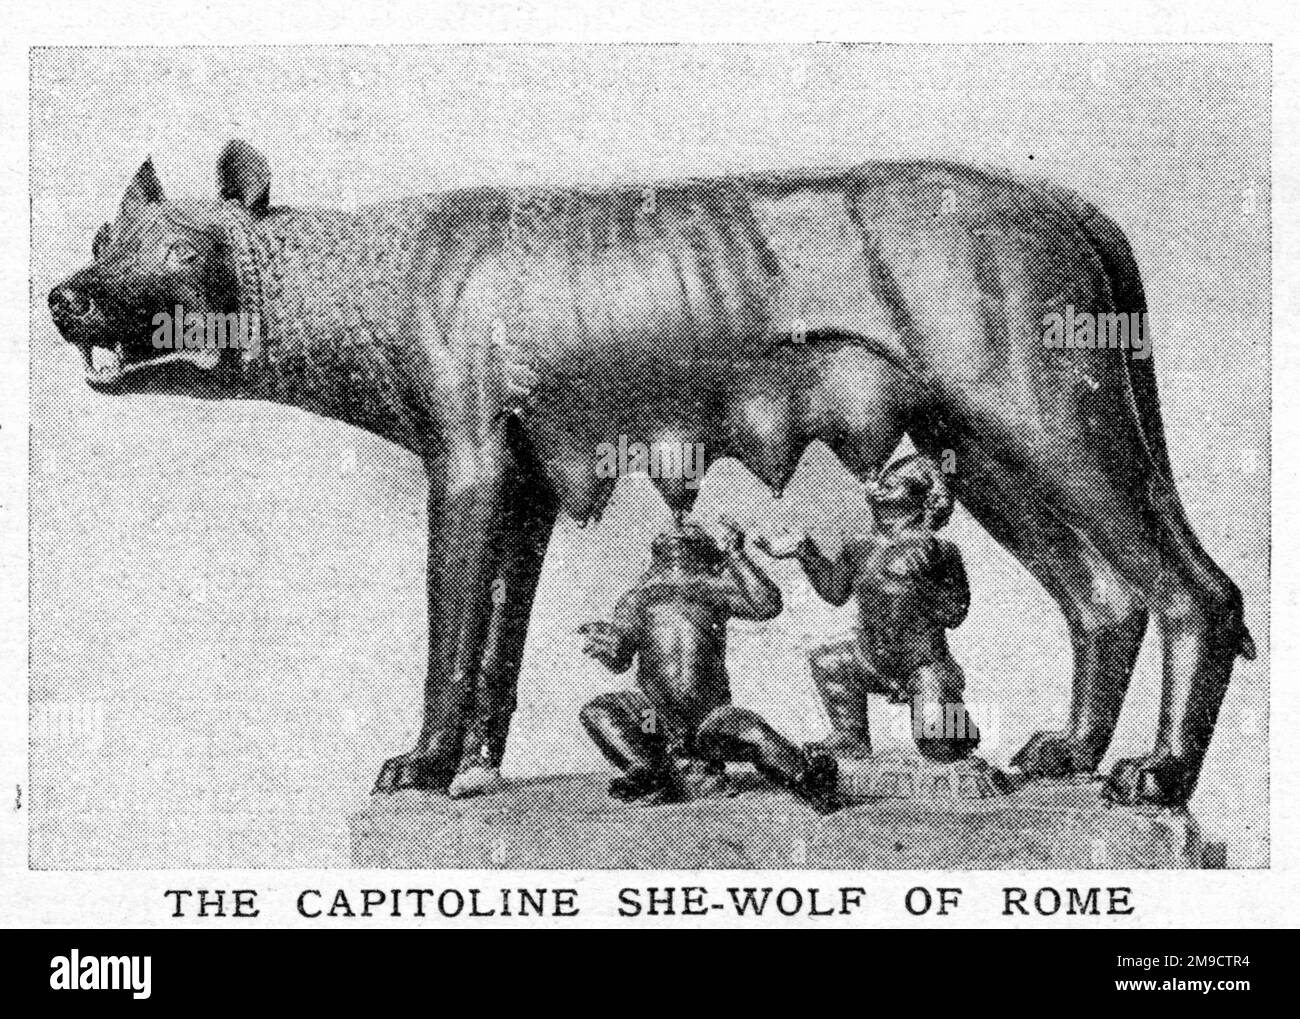 The Capitoline She-Wolf Of Rome (Romulus & Remus) Stock Photo